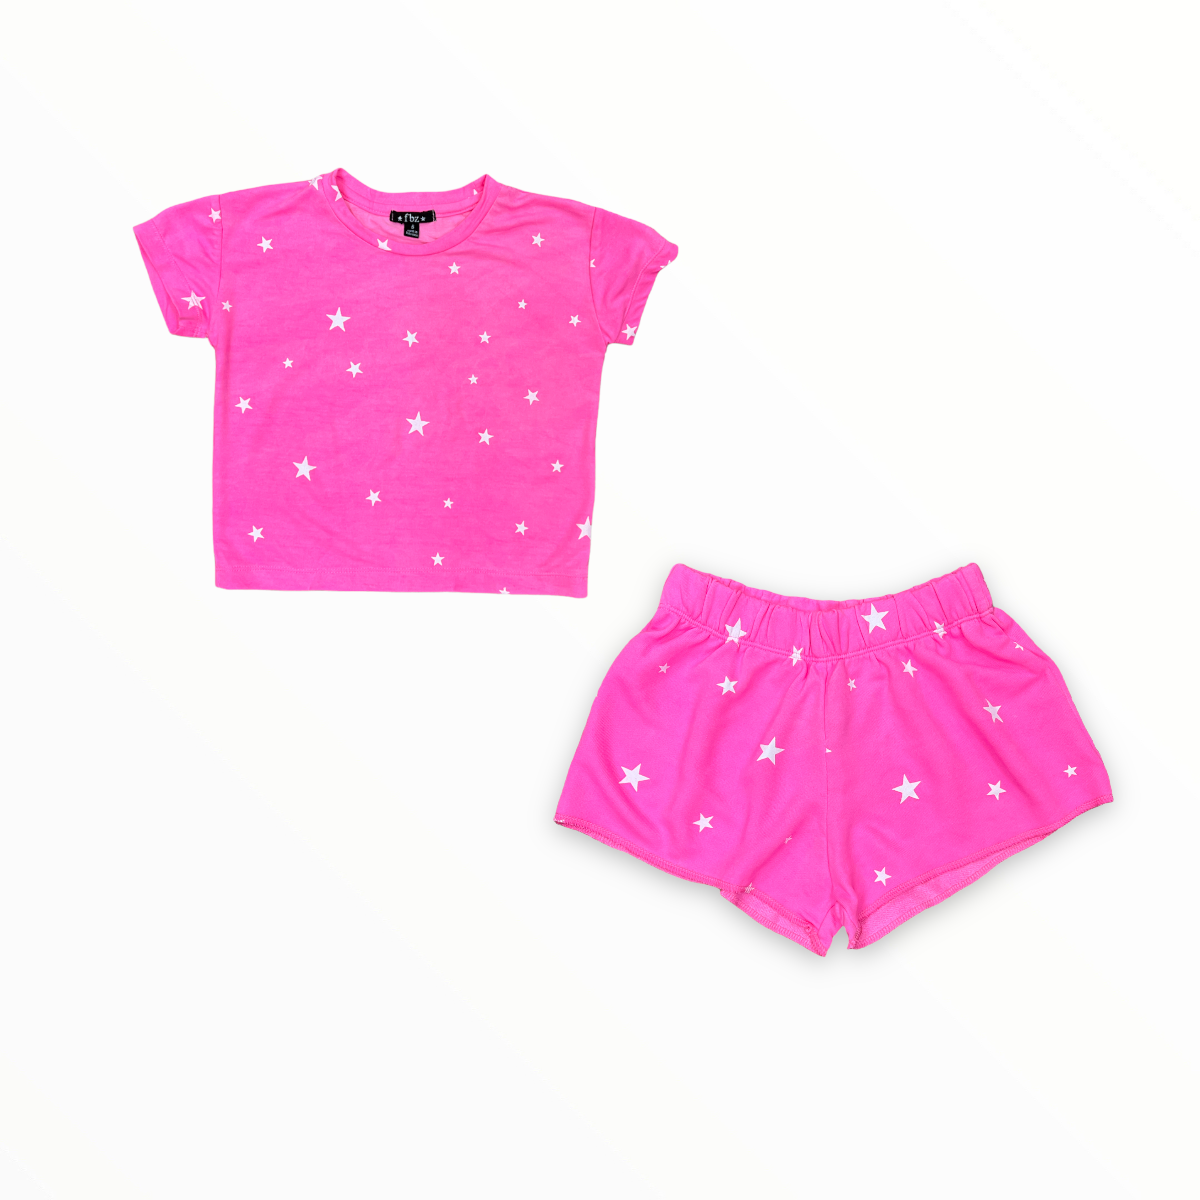 FLOWERS BY ZOE SHORTS - NEON PINK/STARS